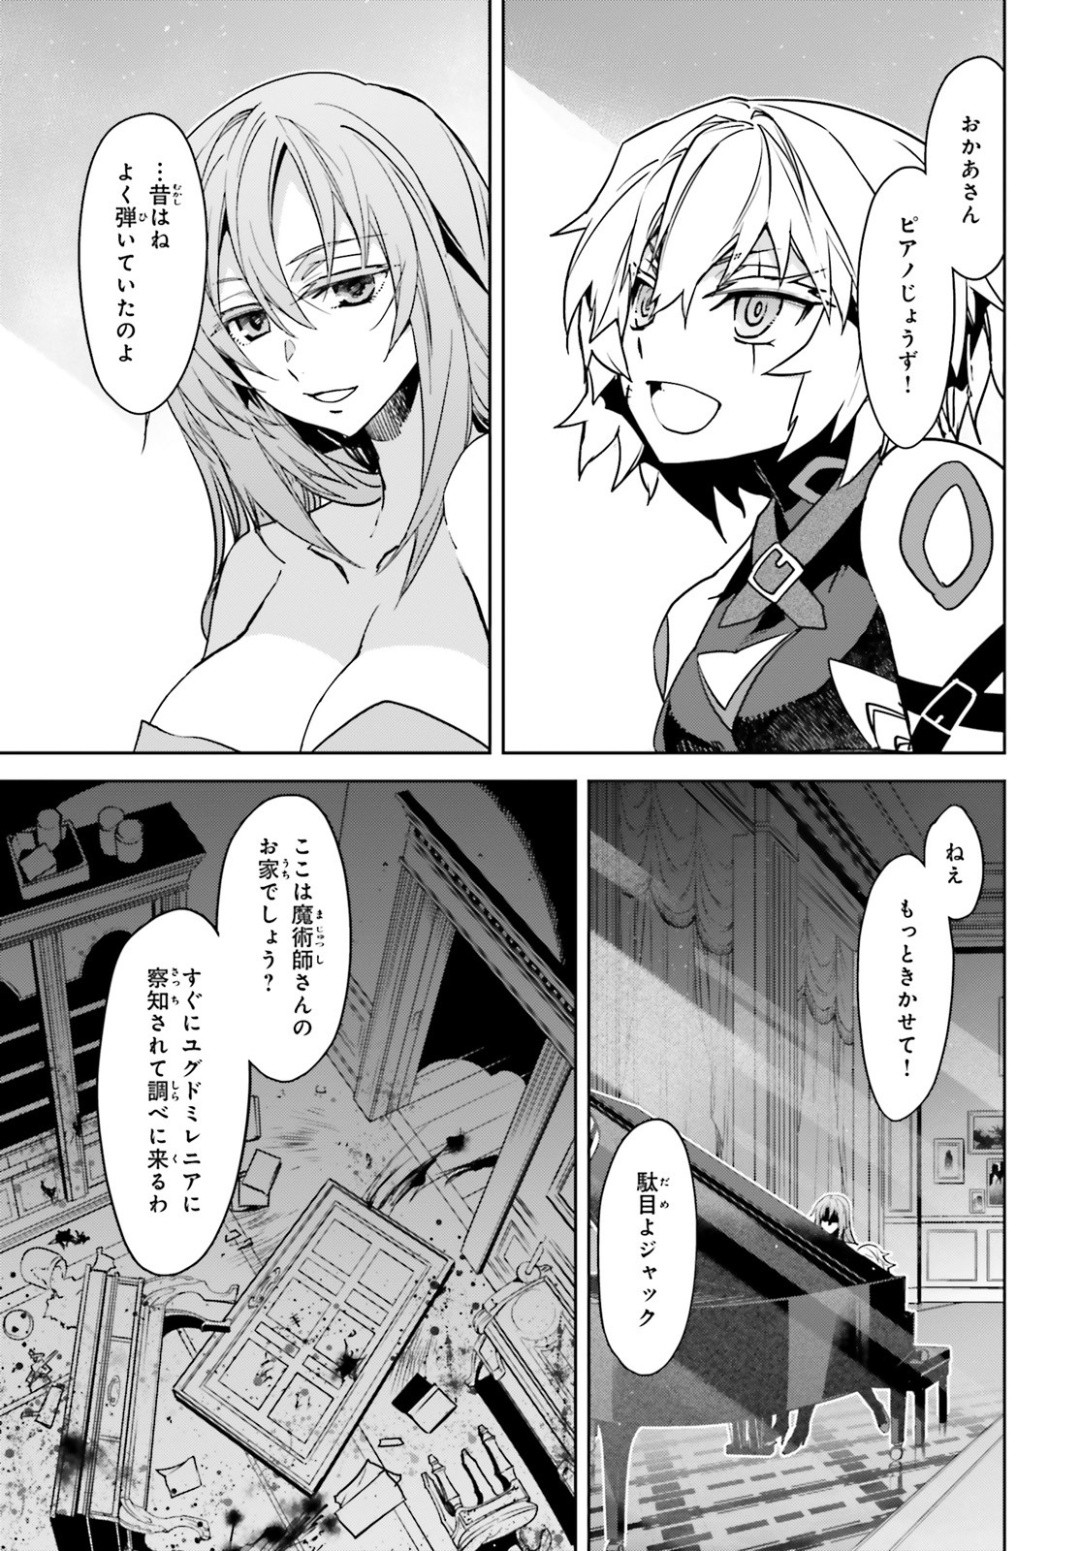 Fate-Apocrypha - Chapter 39 - Page 23